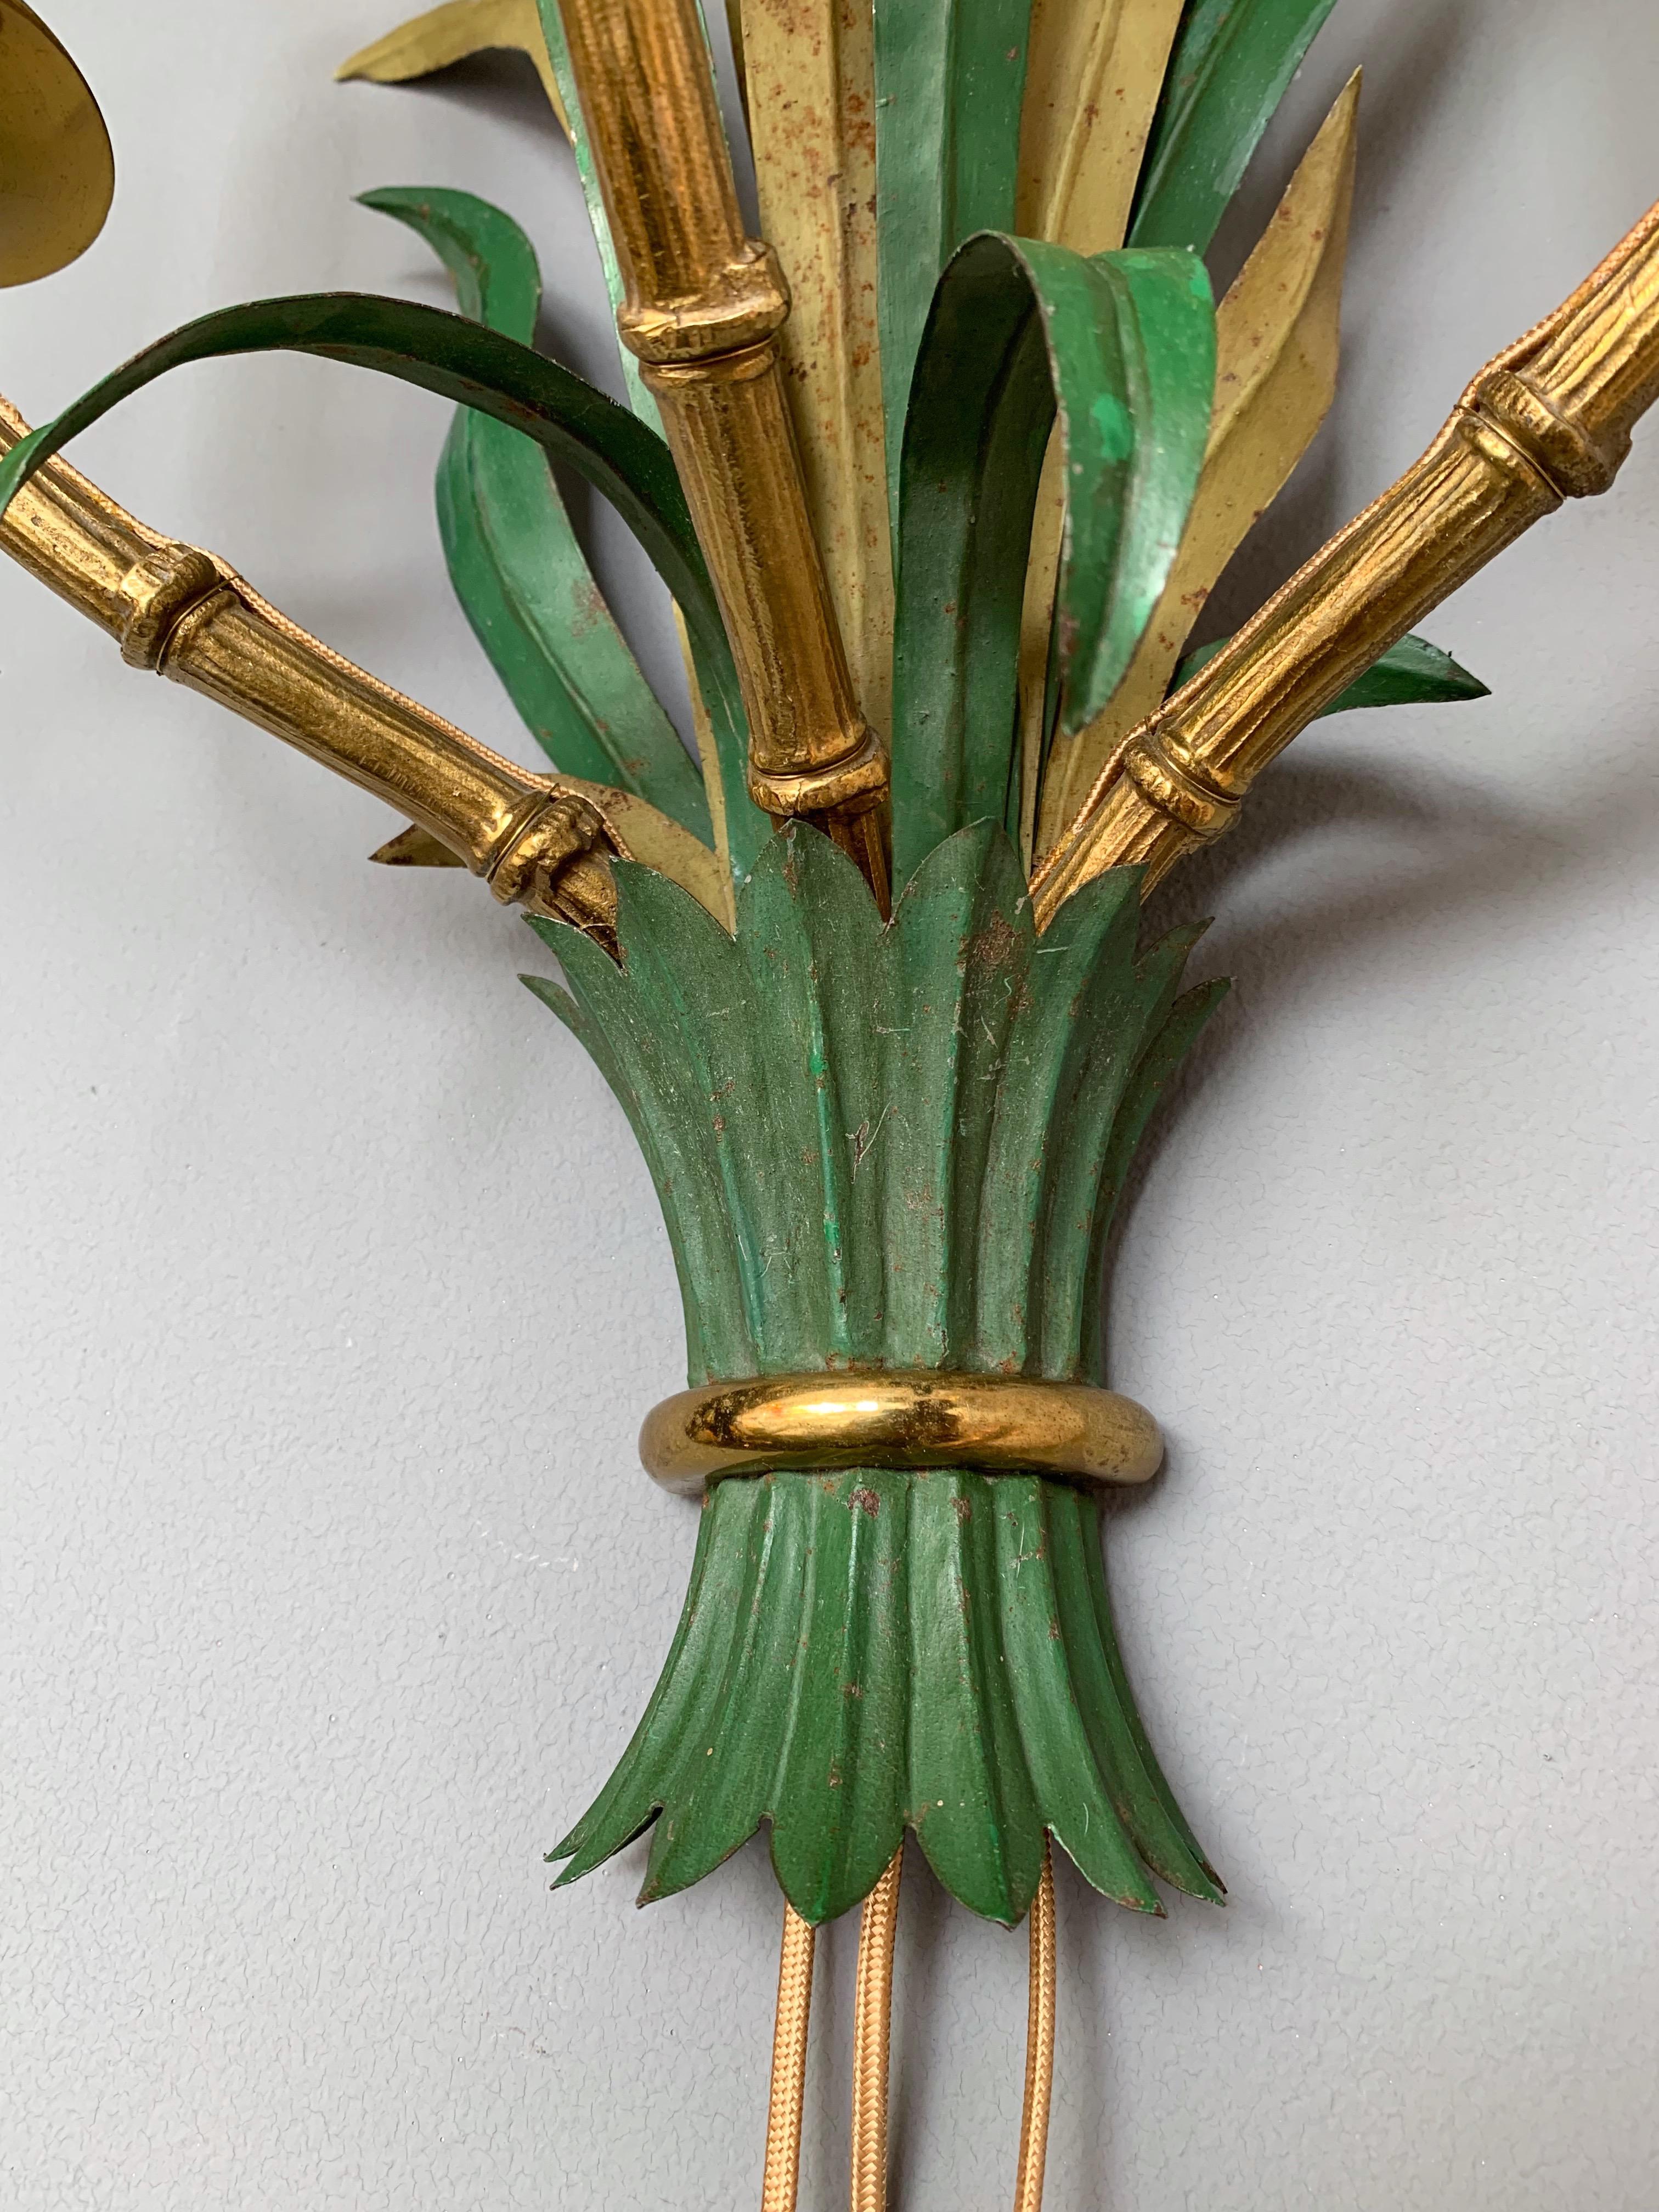 iconic neoclassical wall lights sconces bronze bamboo palm tree with lacquered brass leaf by Maison Bagues. Great patina. Famous manufacture like Jansen, Charles